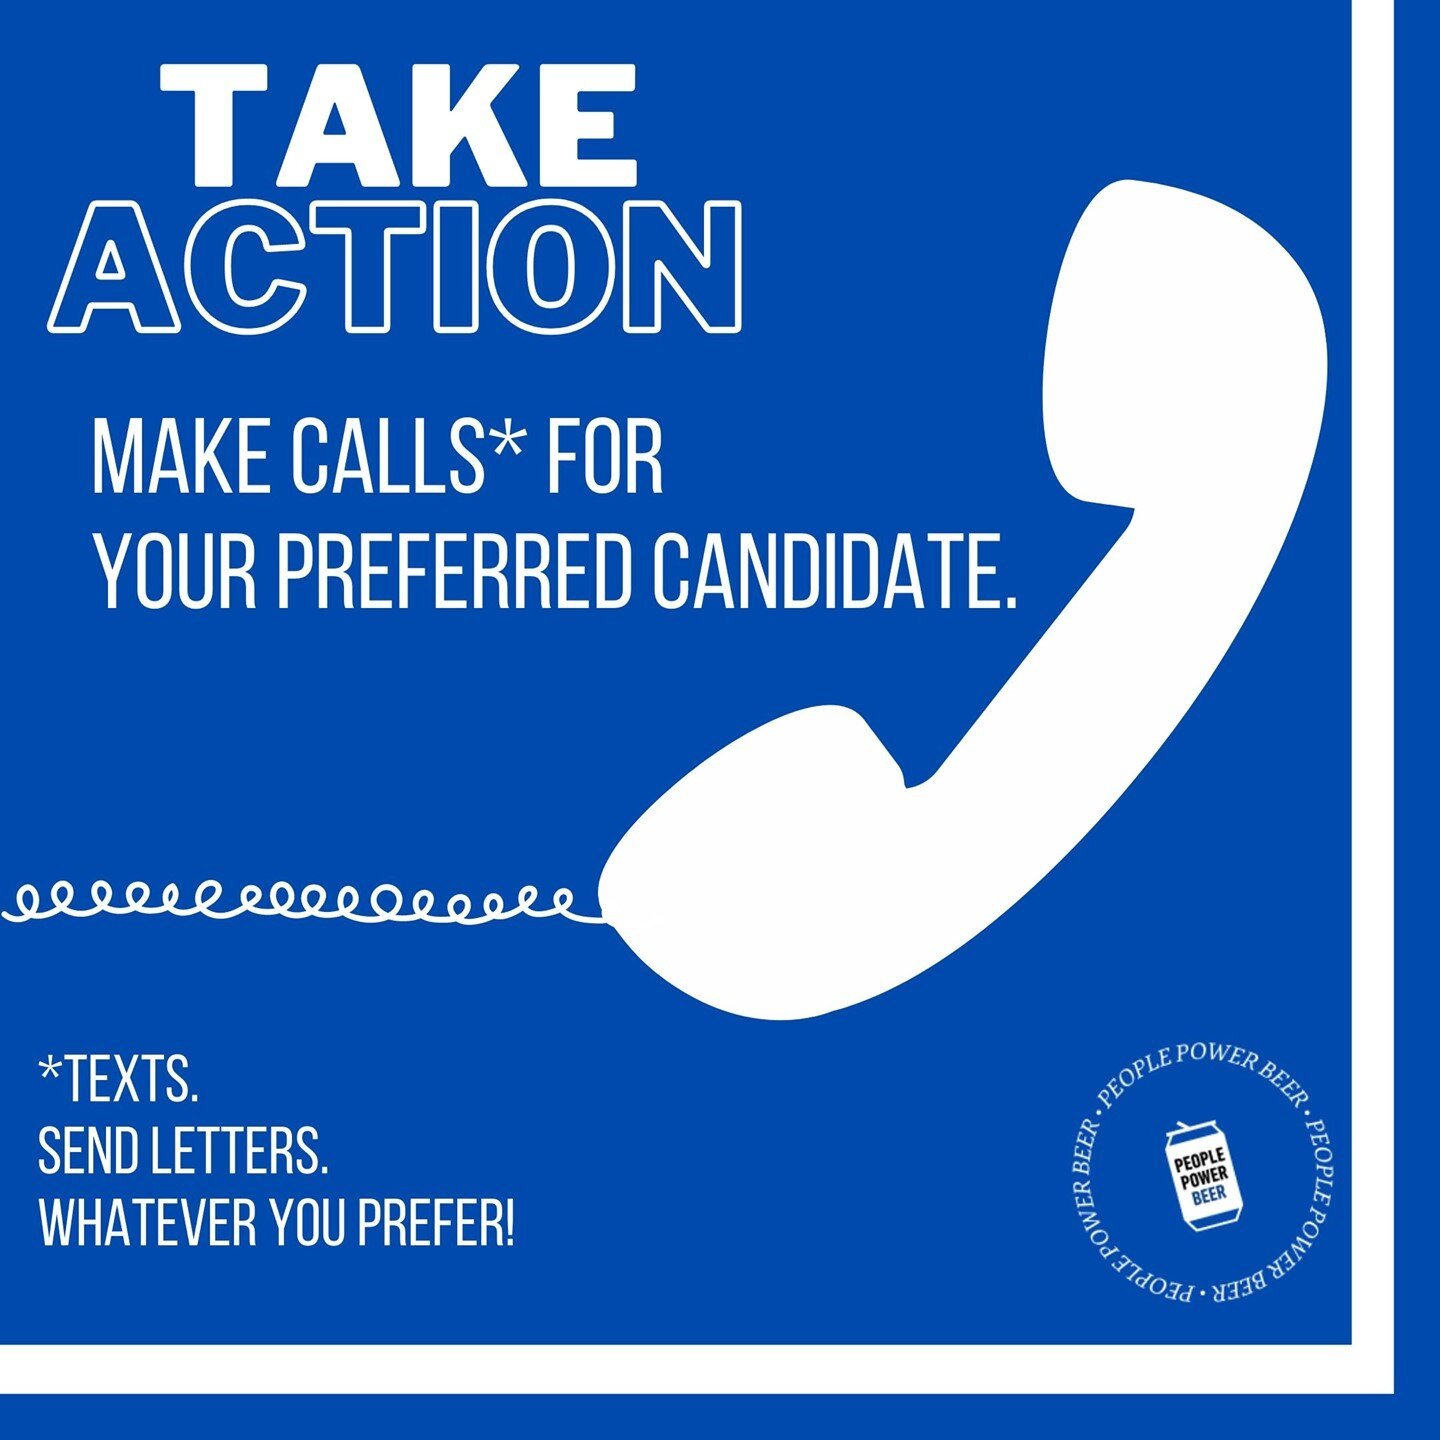 Calling strangers can be intimidating, we know, but this year there are more ways than ever to get in touch with people to remind them to vote. Your preferred candidate's website has actions you can take to call voters, particularly in swing states, 